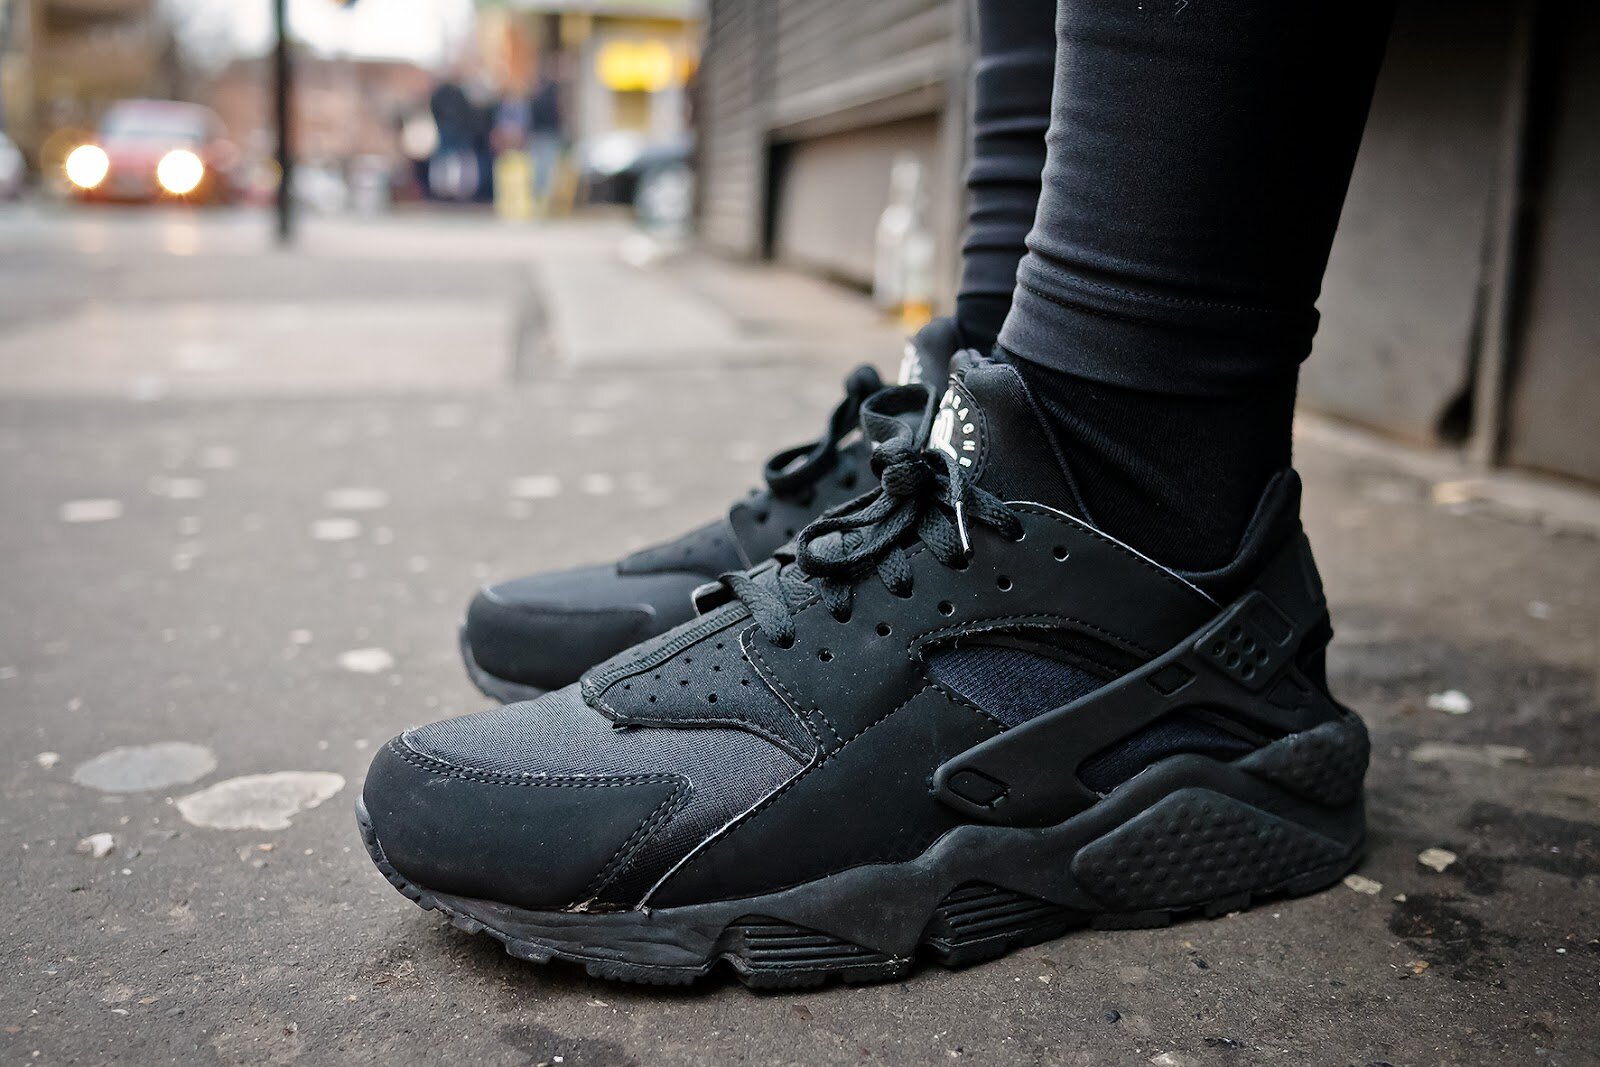 liner Interruption Relative The Nike Air Huarache Black/white Is On Sale For $88 Shipped! — Kicks Under  Cost